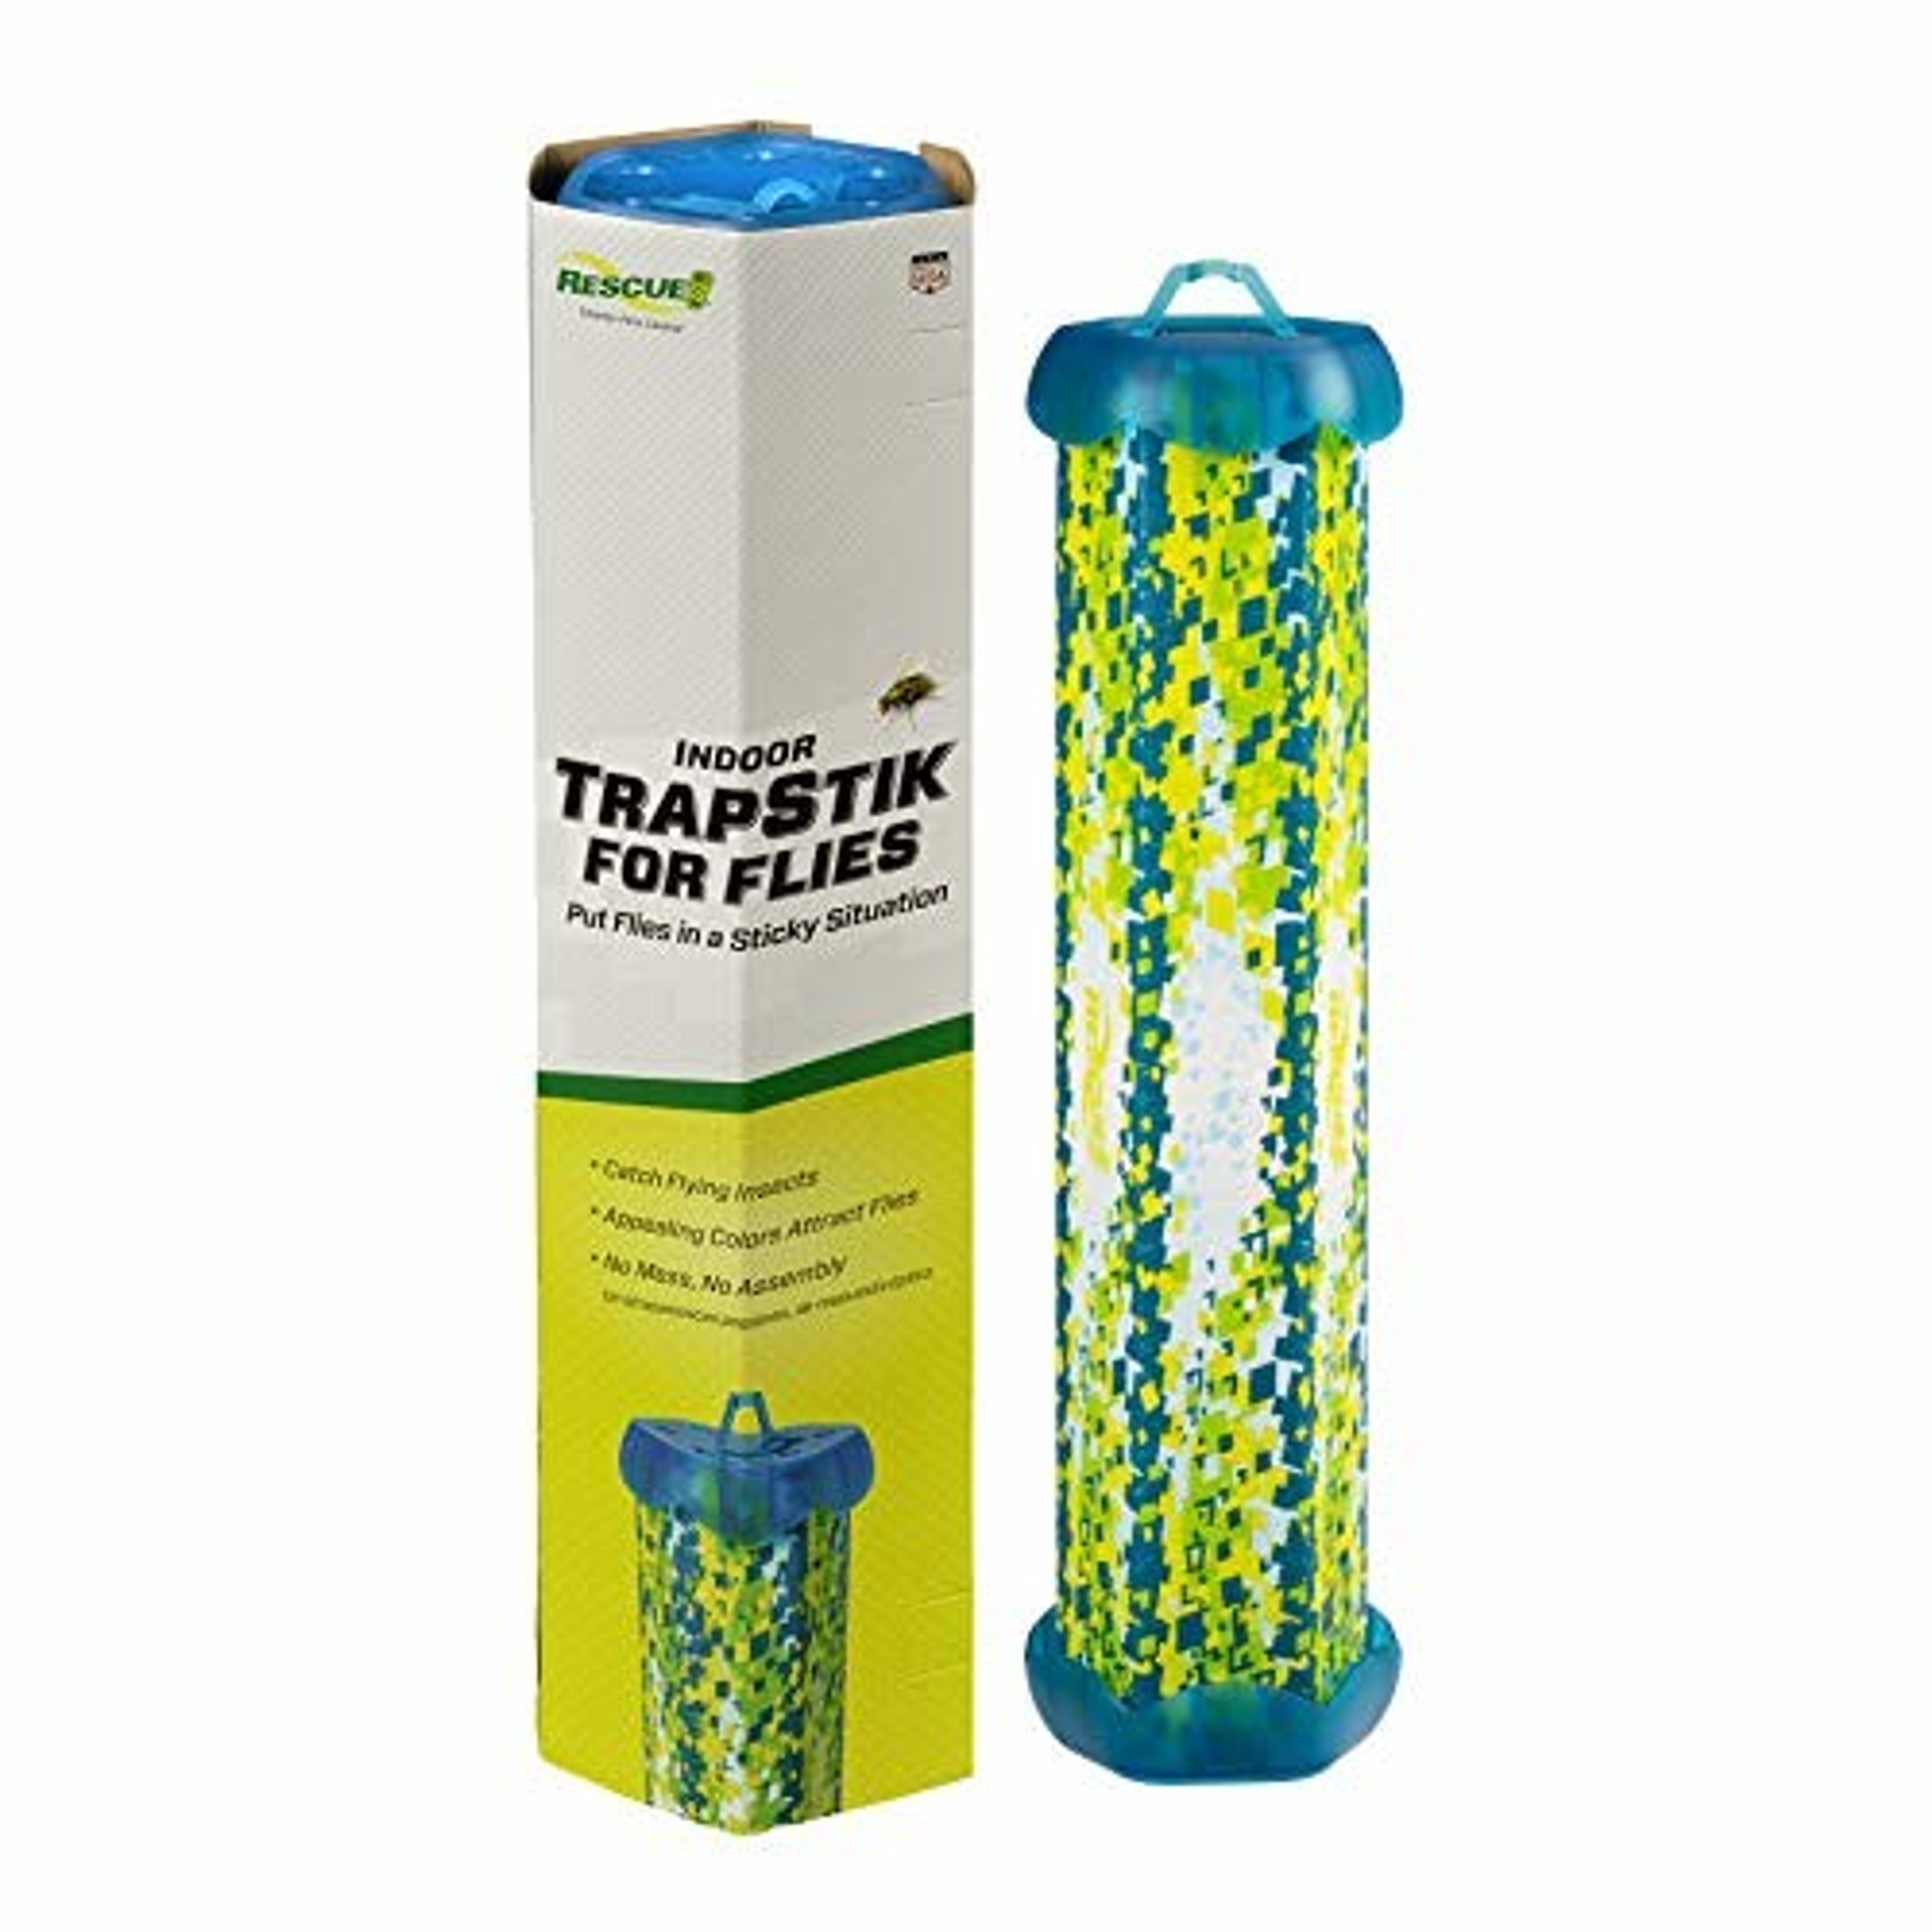 RESCUE Non-Toxic TrapStik for Flies, Indoor Hanging Fly Trap